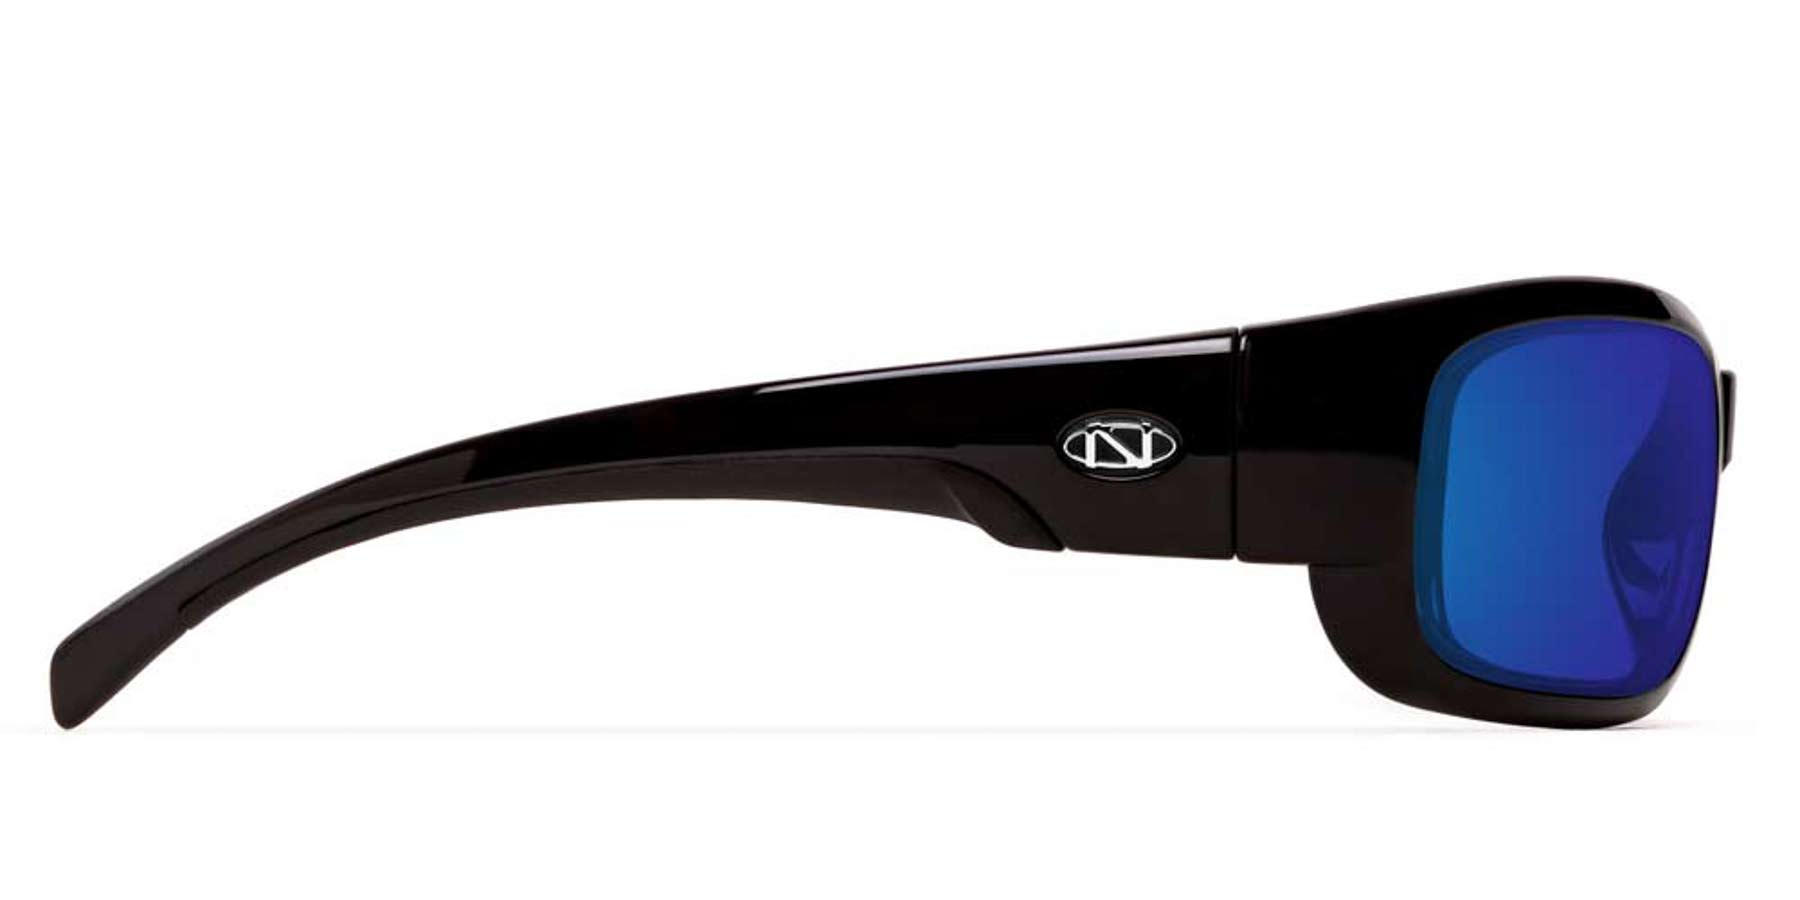 Matrix Denali Prescription Safety Glasses - ANSI Z87.1 Certified -  Industrial Construction and Tactical Glasses